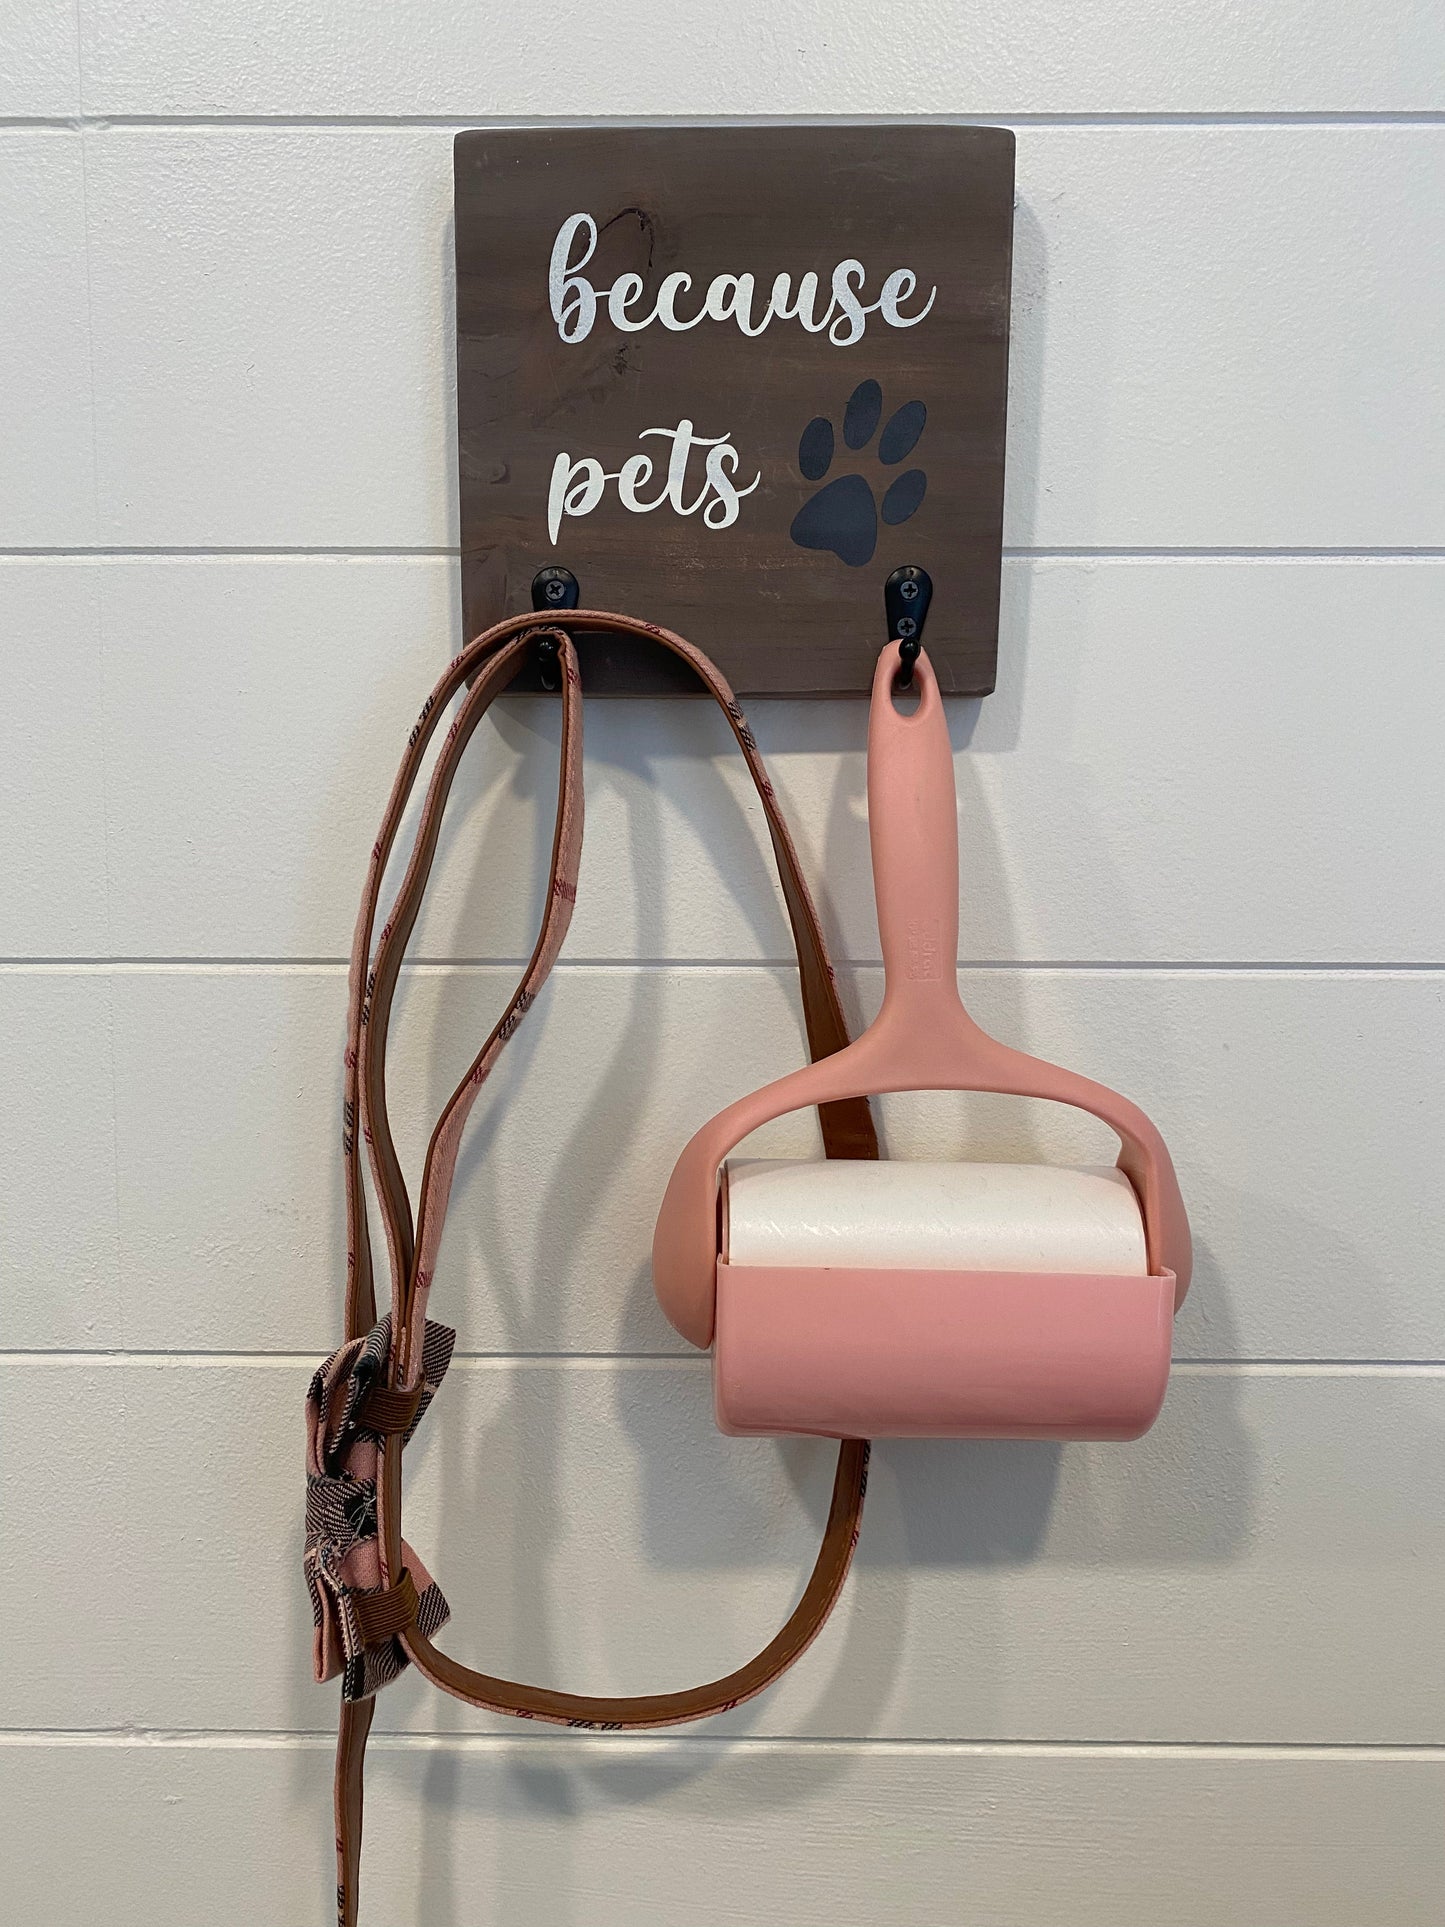 Lint Roller Hanger for Pet Owners